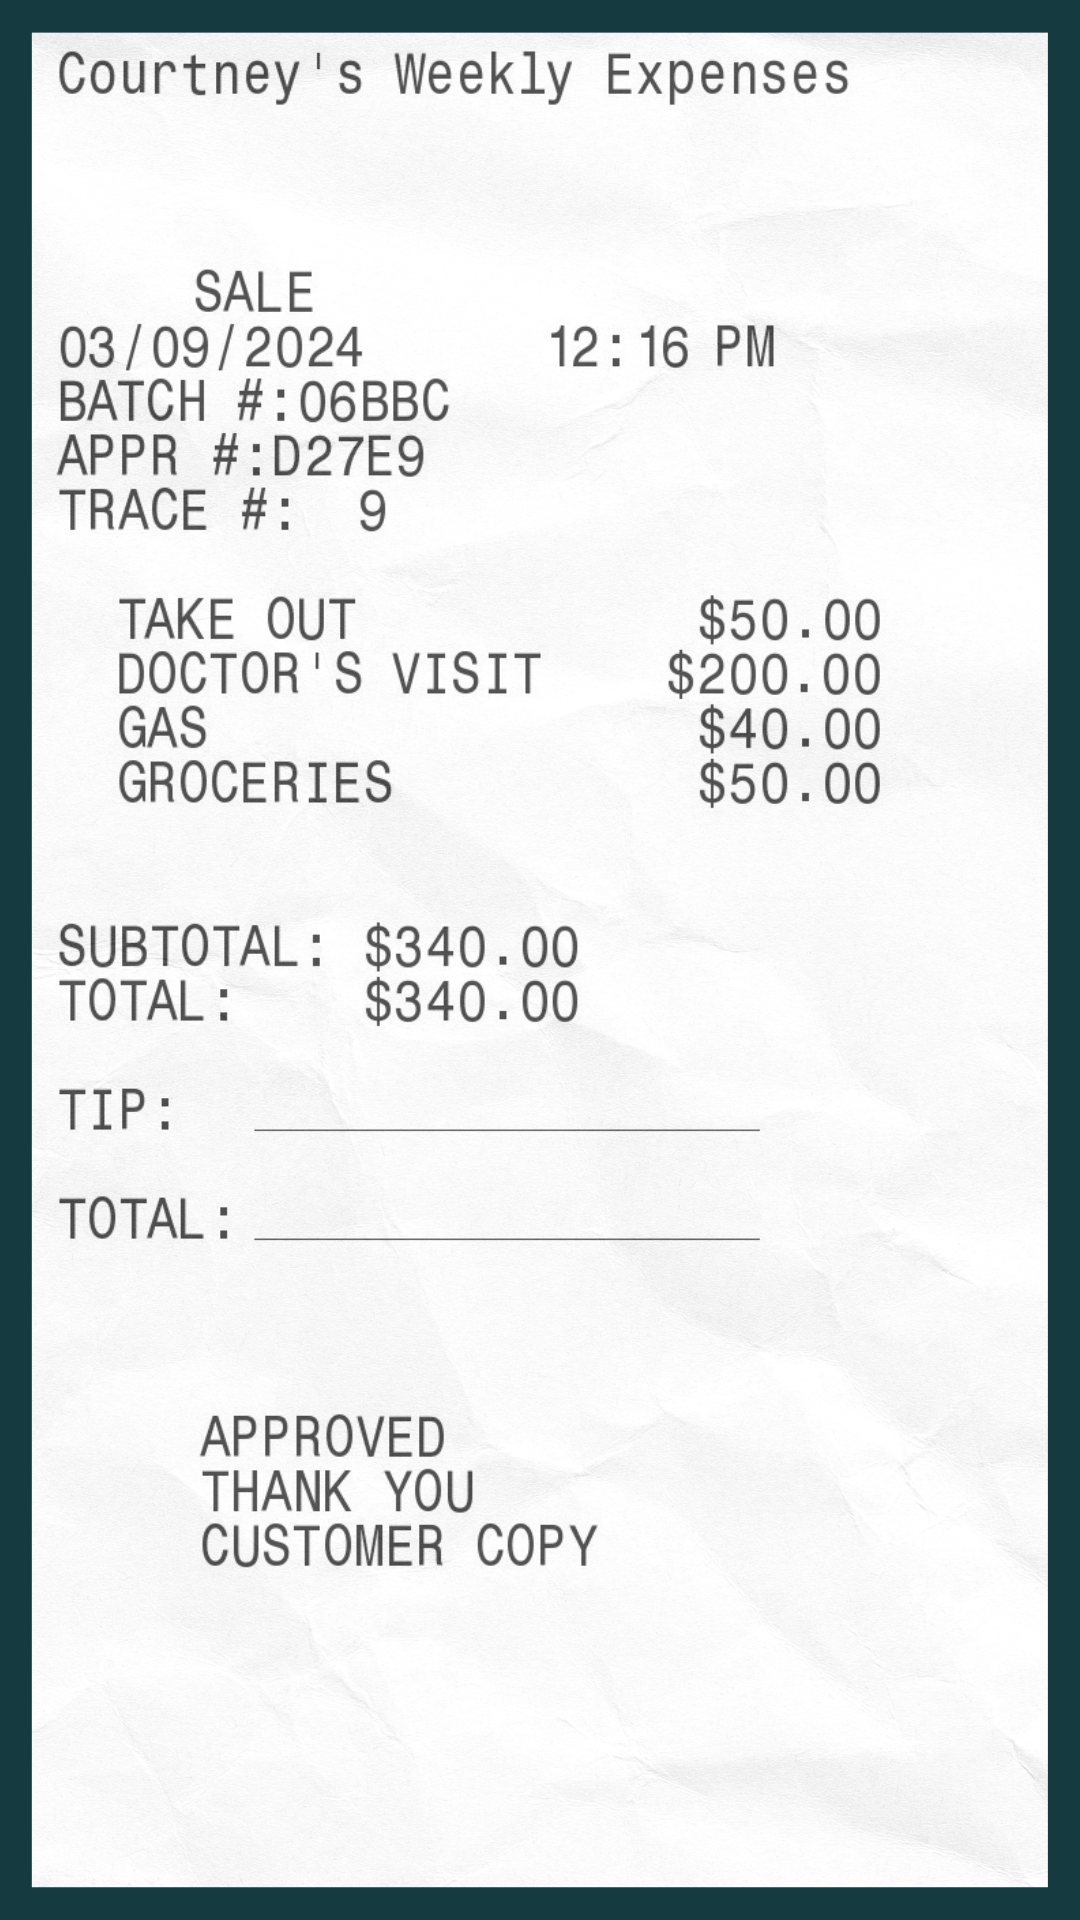 Summary of a receipt with weekly expenses including doctor&#x27;s visit and groceries, totaling $340.00